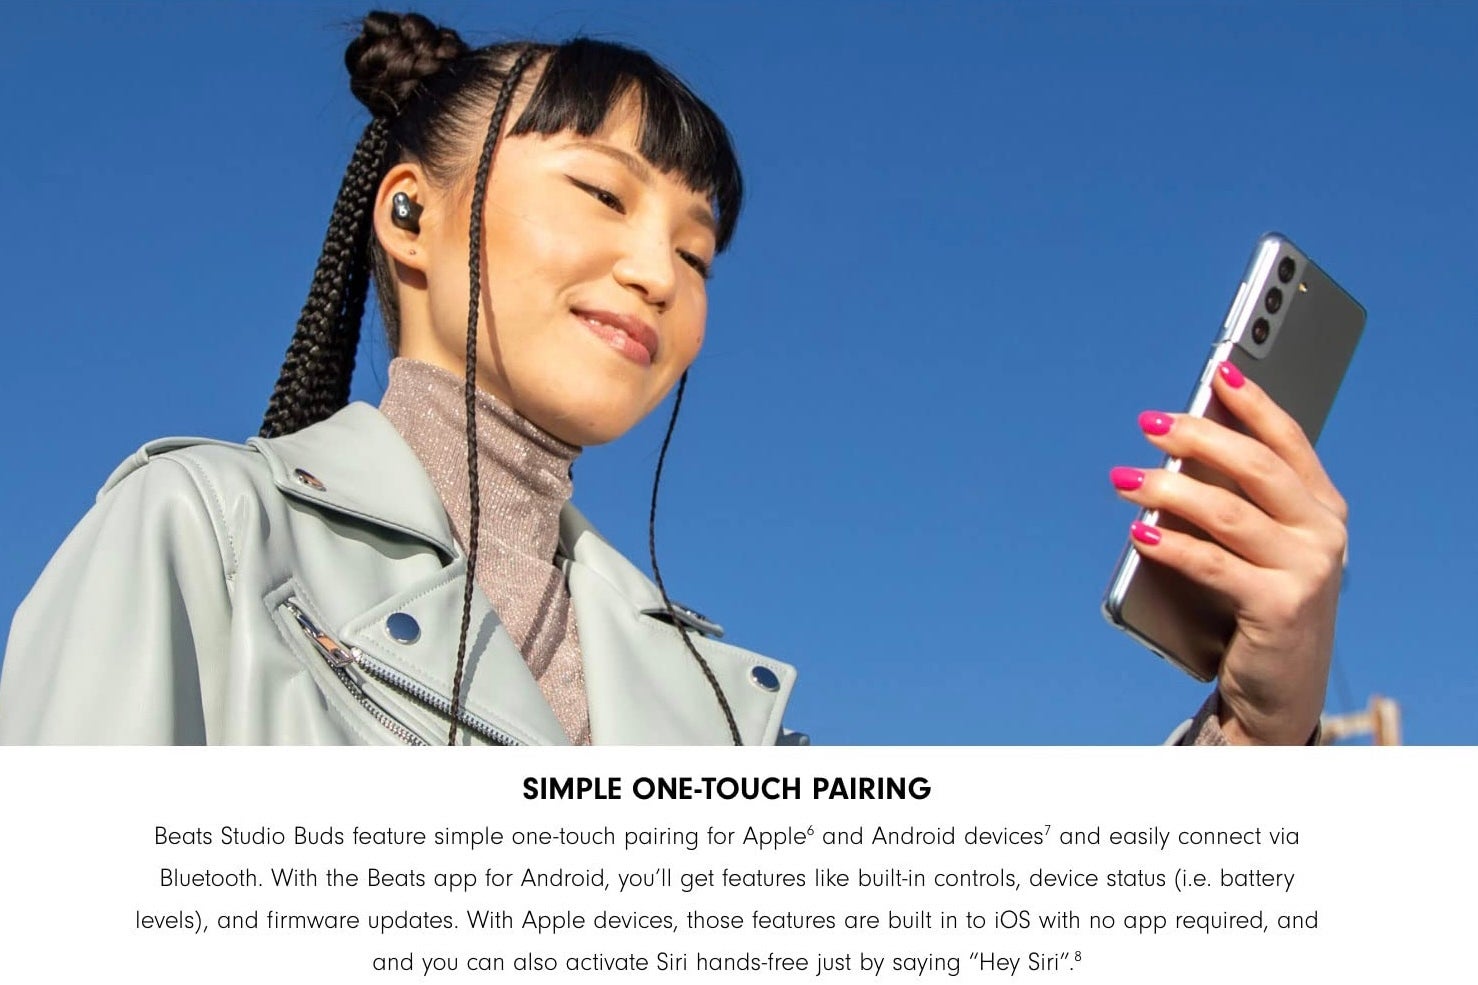 As seen on Amazon.com... - Unprecedented: Apple uses Samsung’s Galaxy S21 to advertise Beats Studio Buds